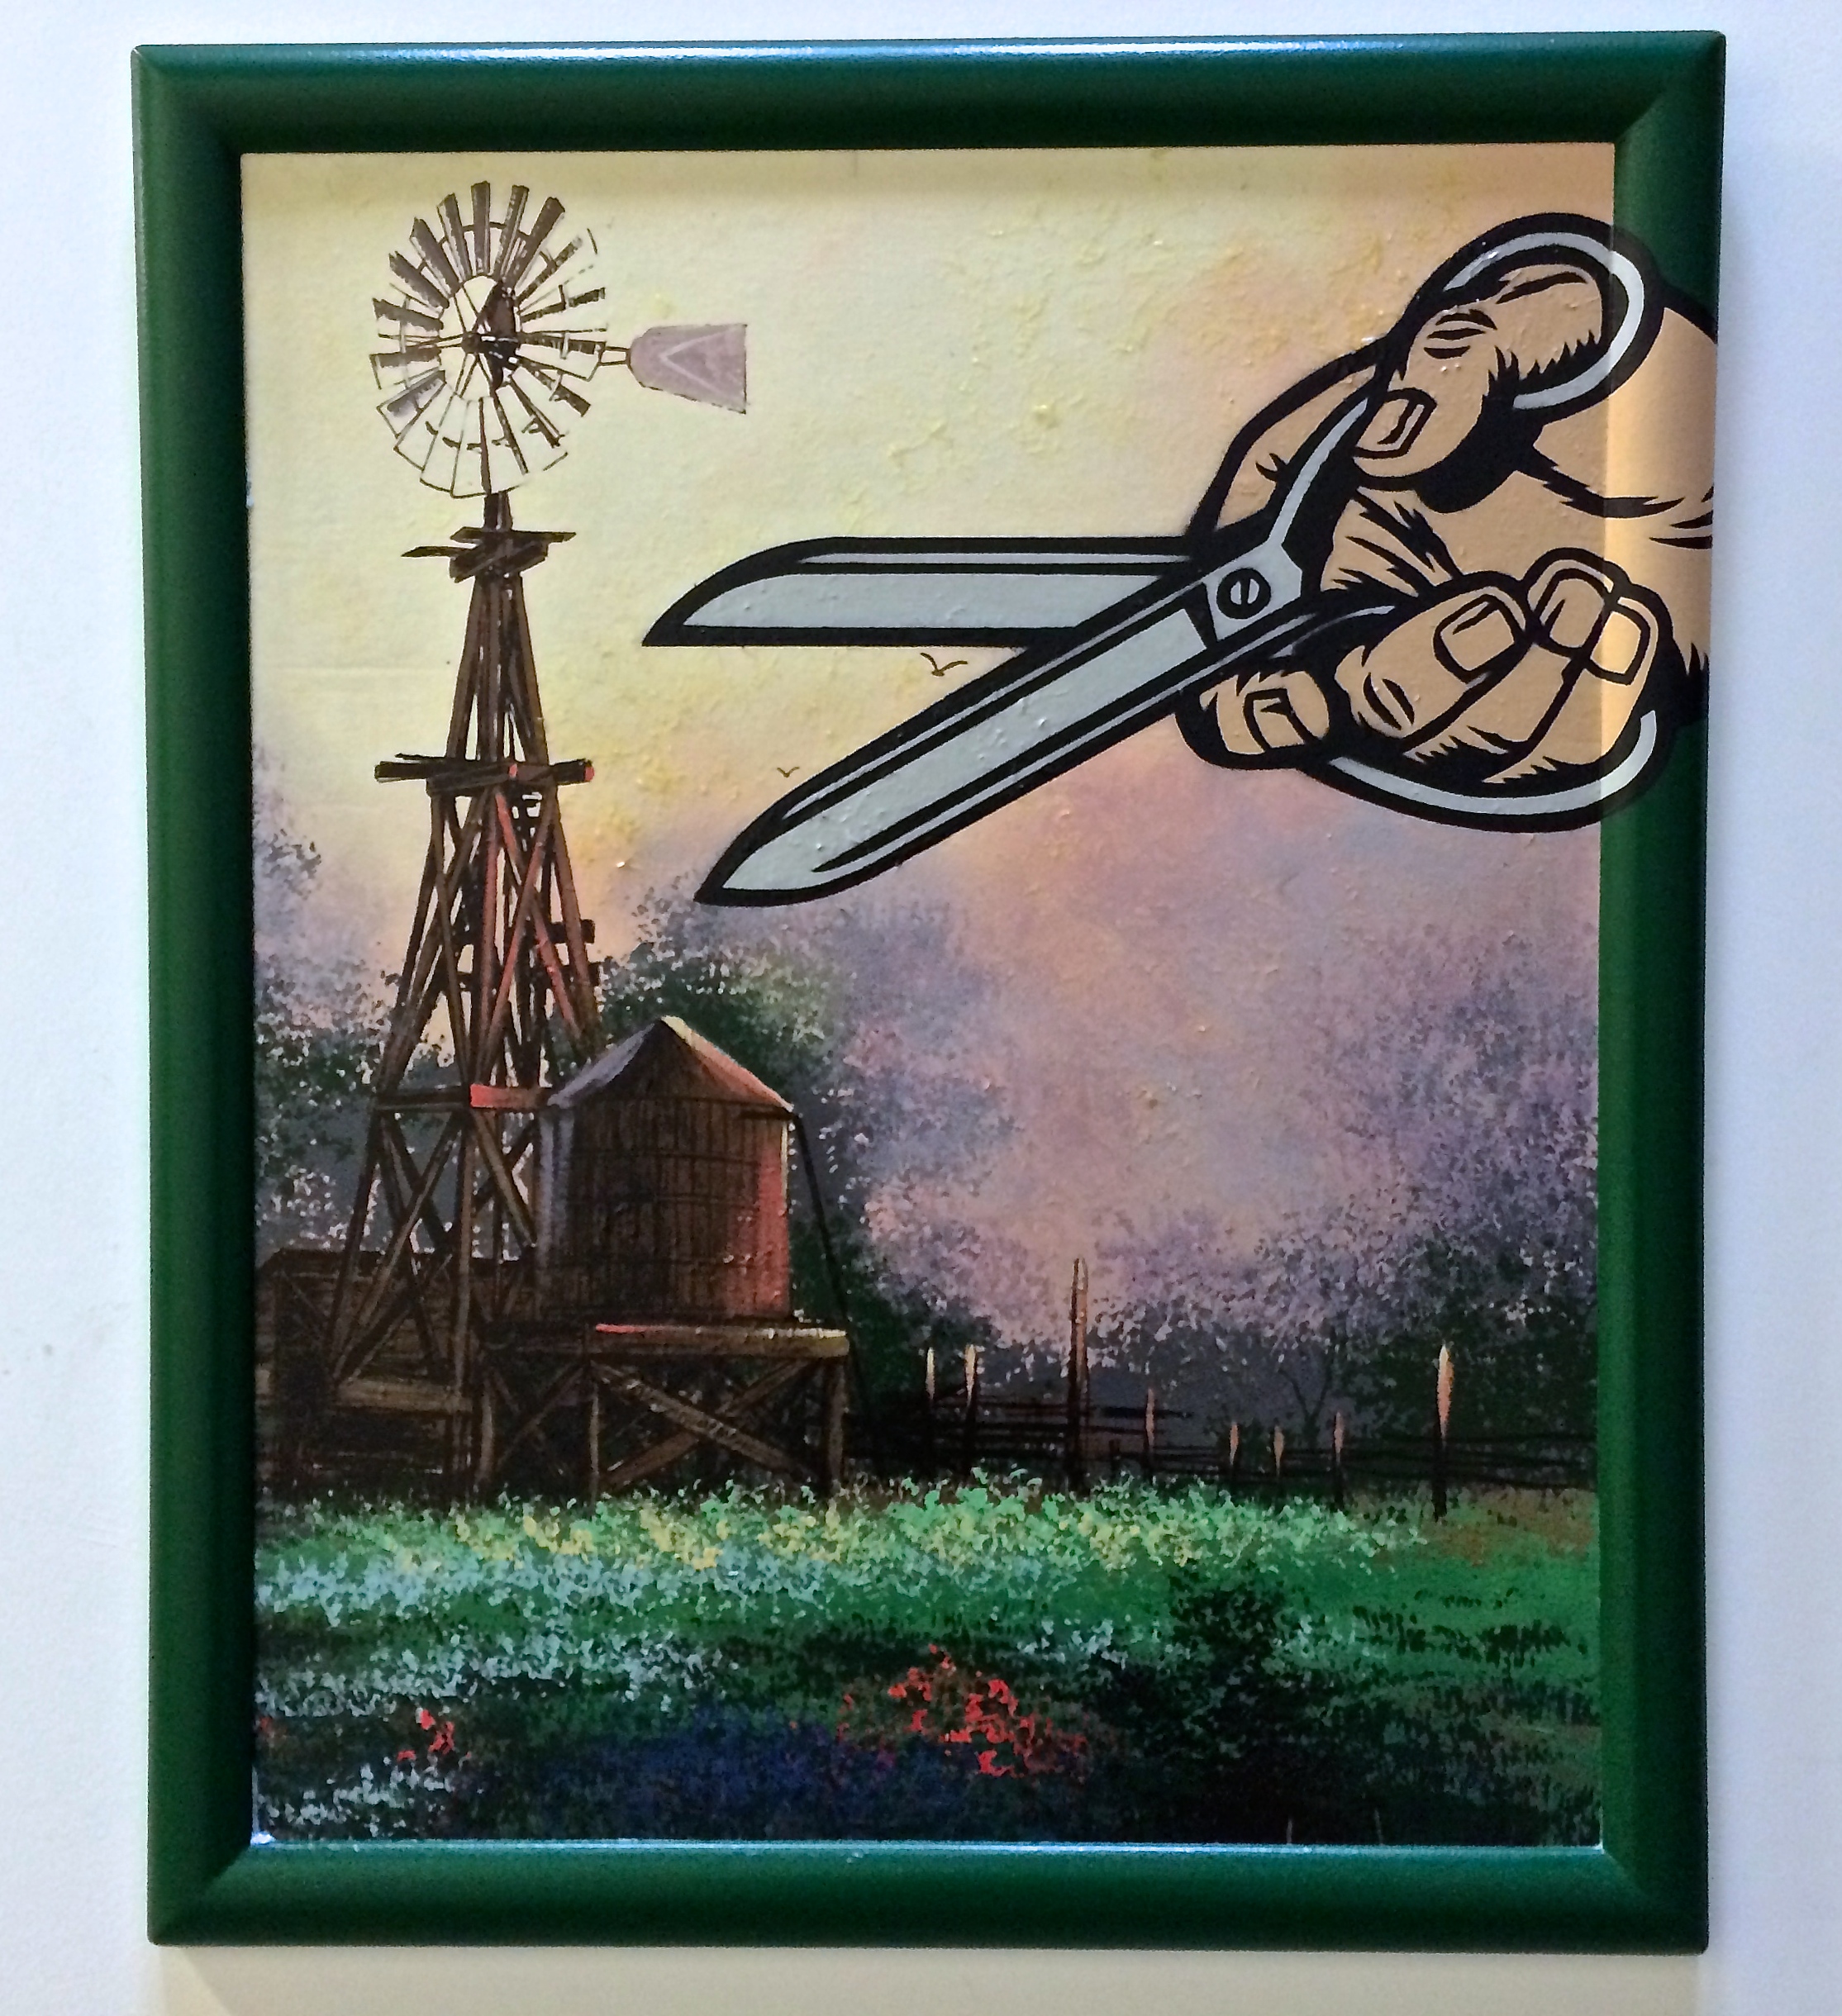 "Smite thee" Acrylic & spray paint on found/vintage painting/frame, 34"x28"